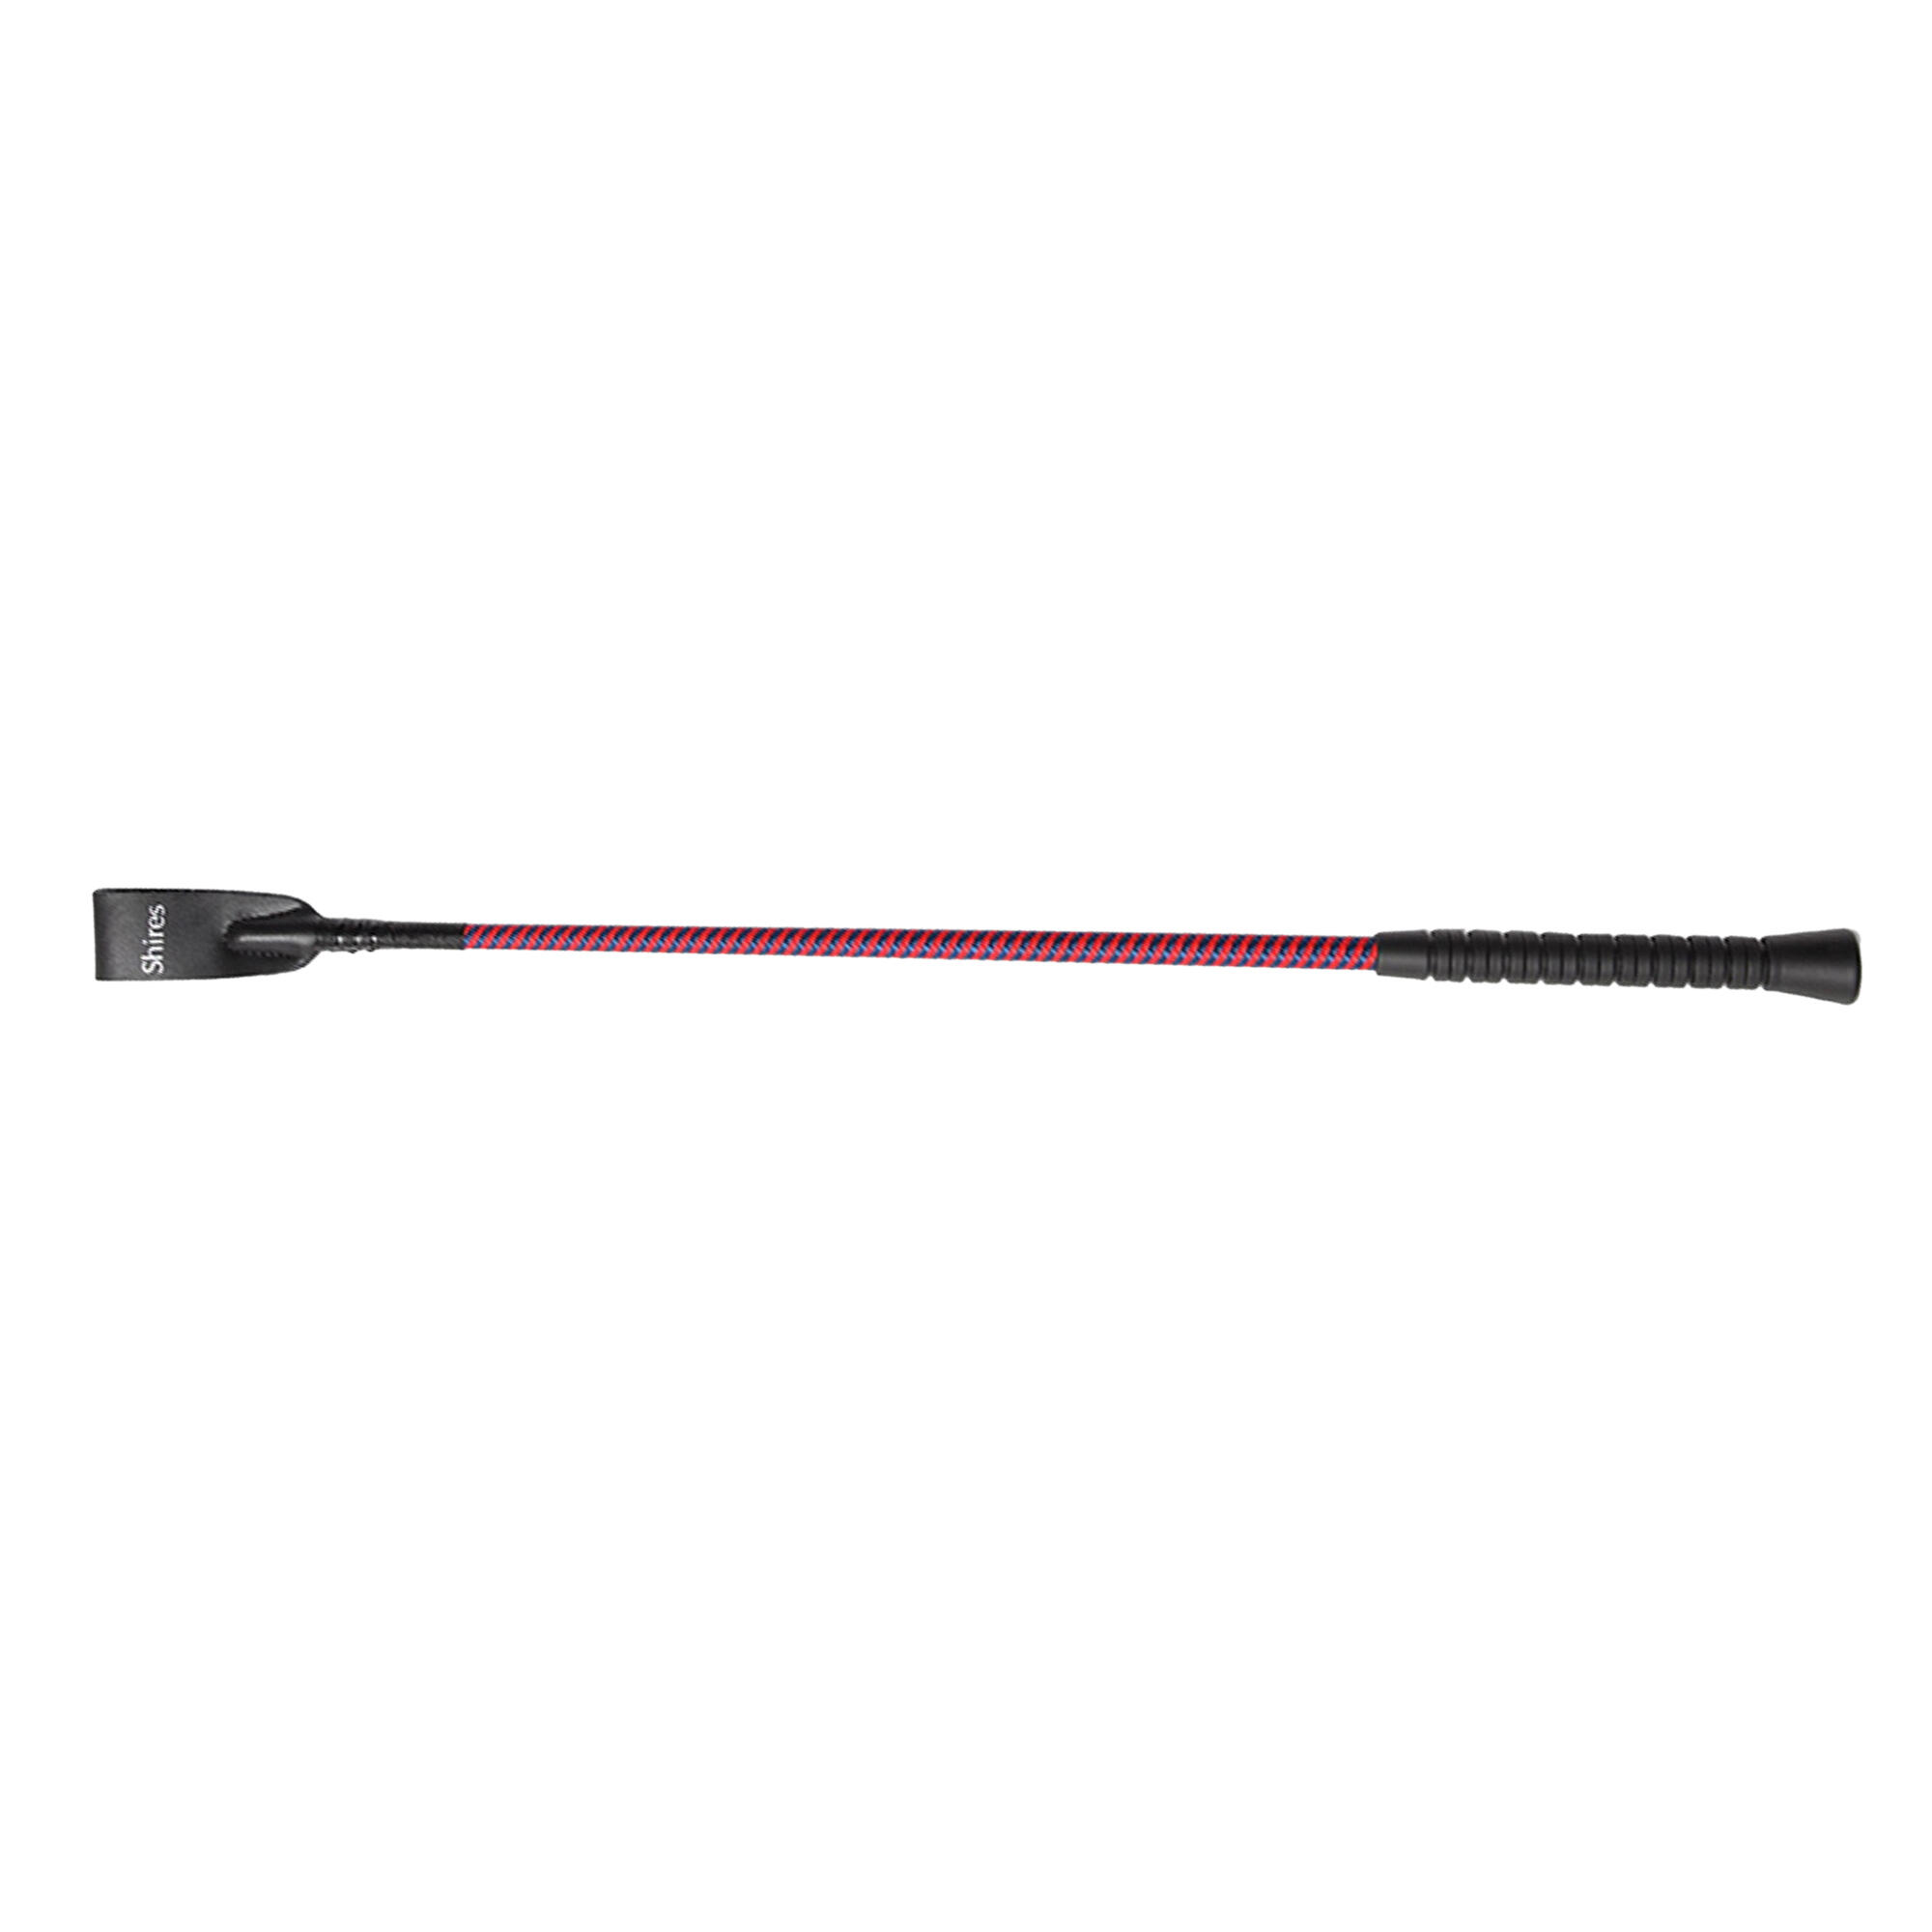 Threaded Leather Horse Riding Whip (Navy/Red) 3/3